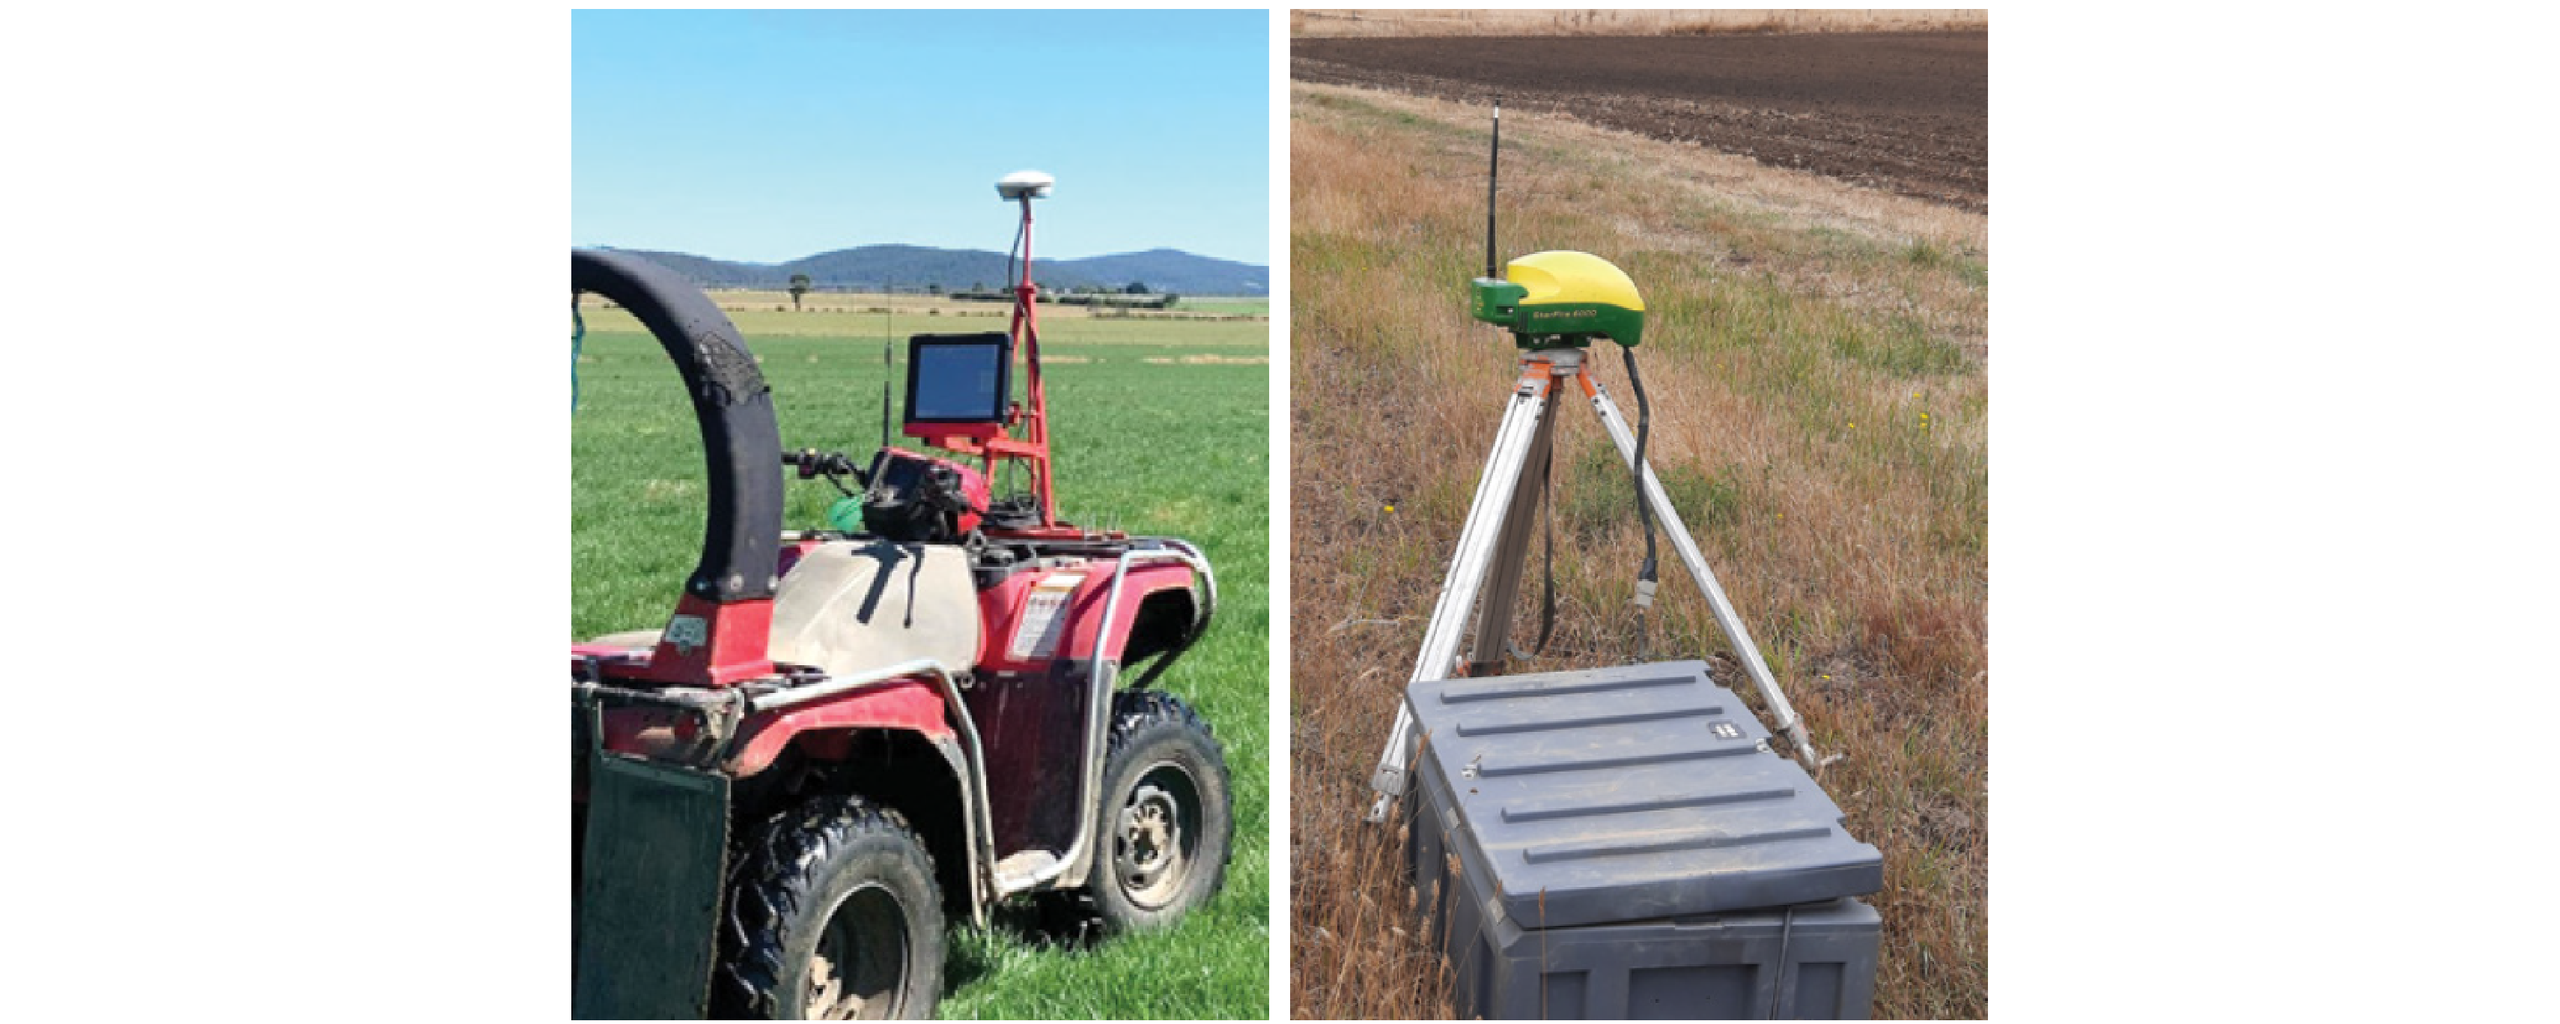 Figure 20. GPS and elevation data collection set up on a quad bike (Photo by Will Wishaw) and an in the paddock base station (right) for accurate elevation data and machinery control.